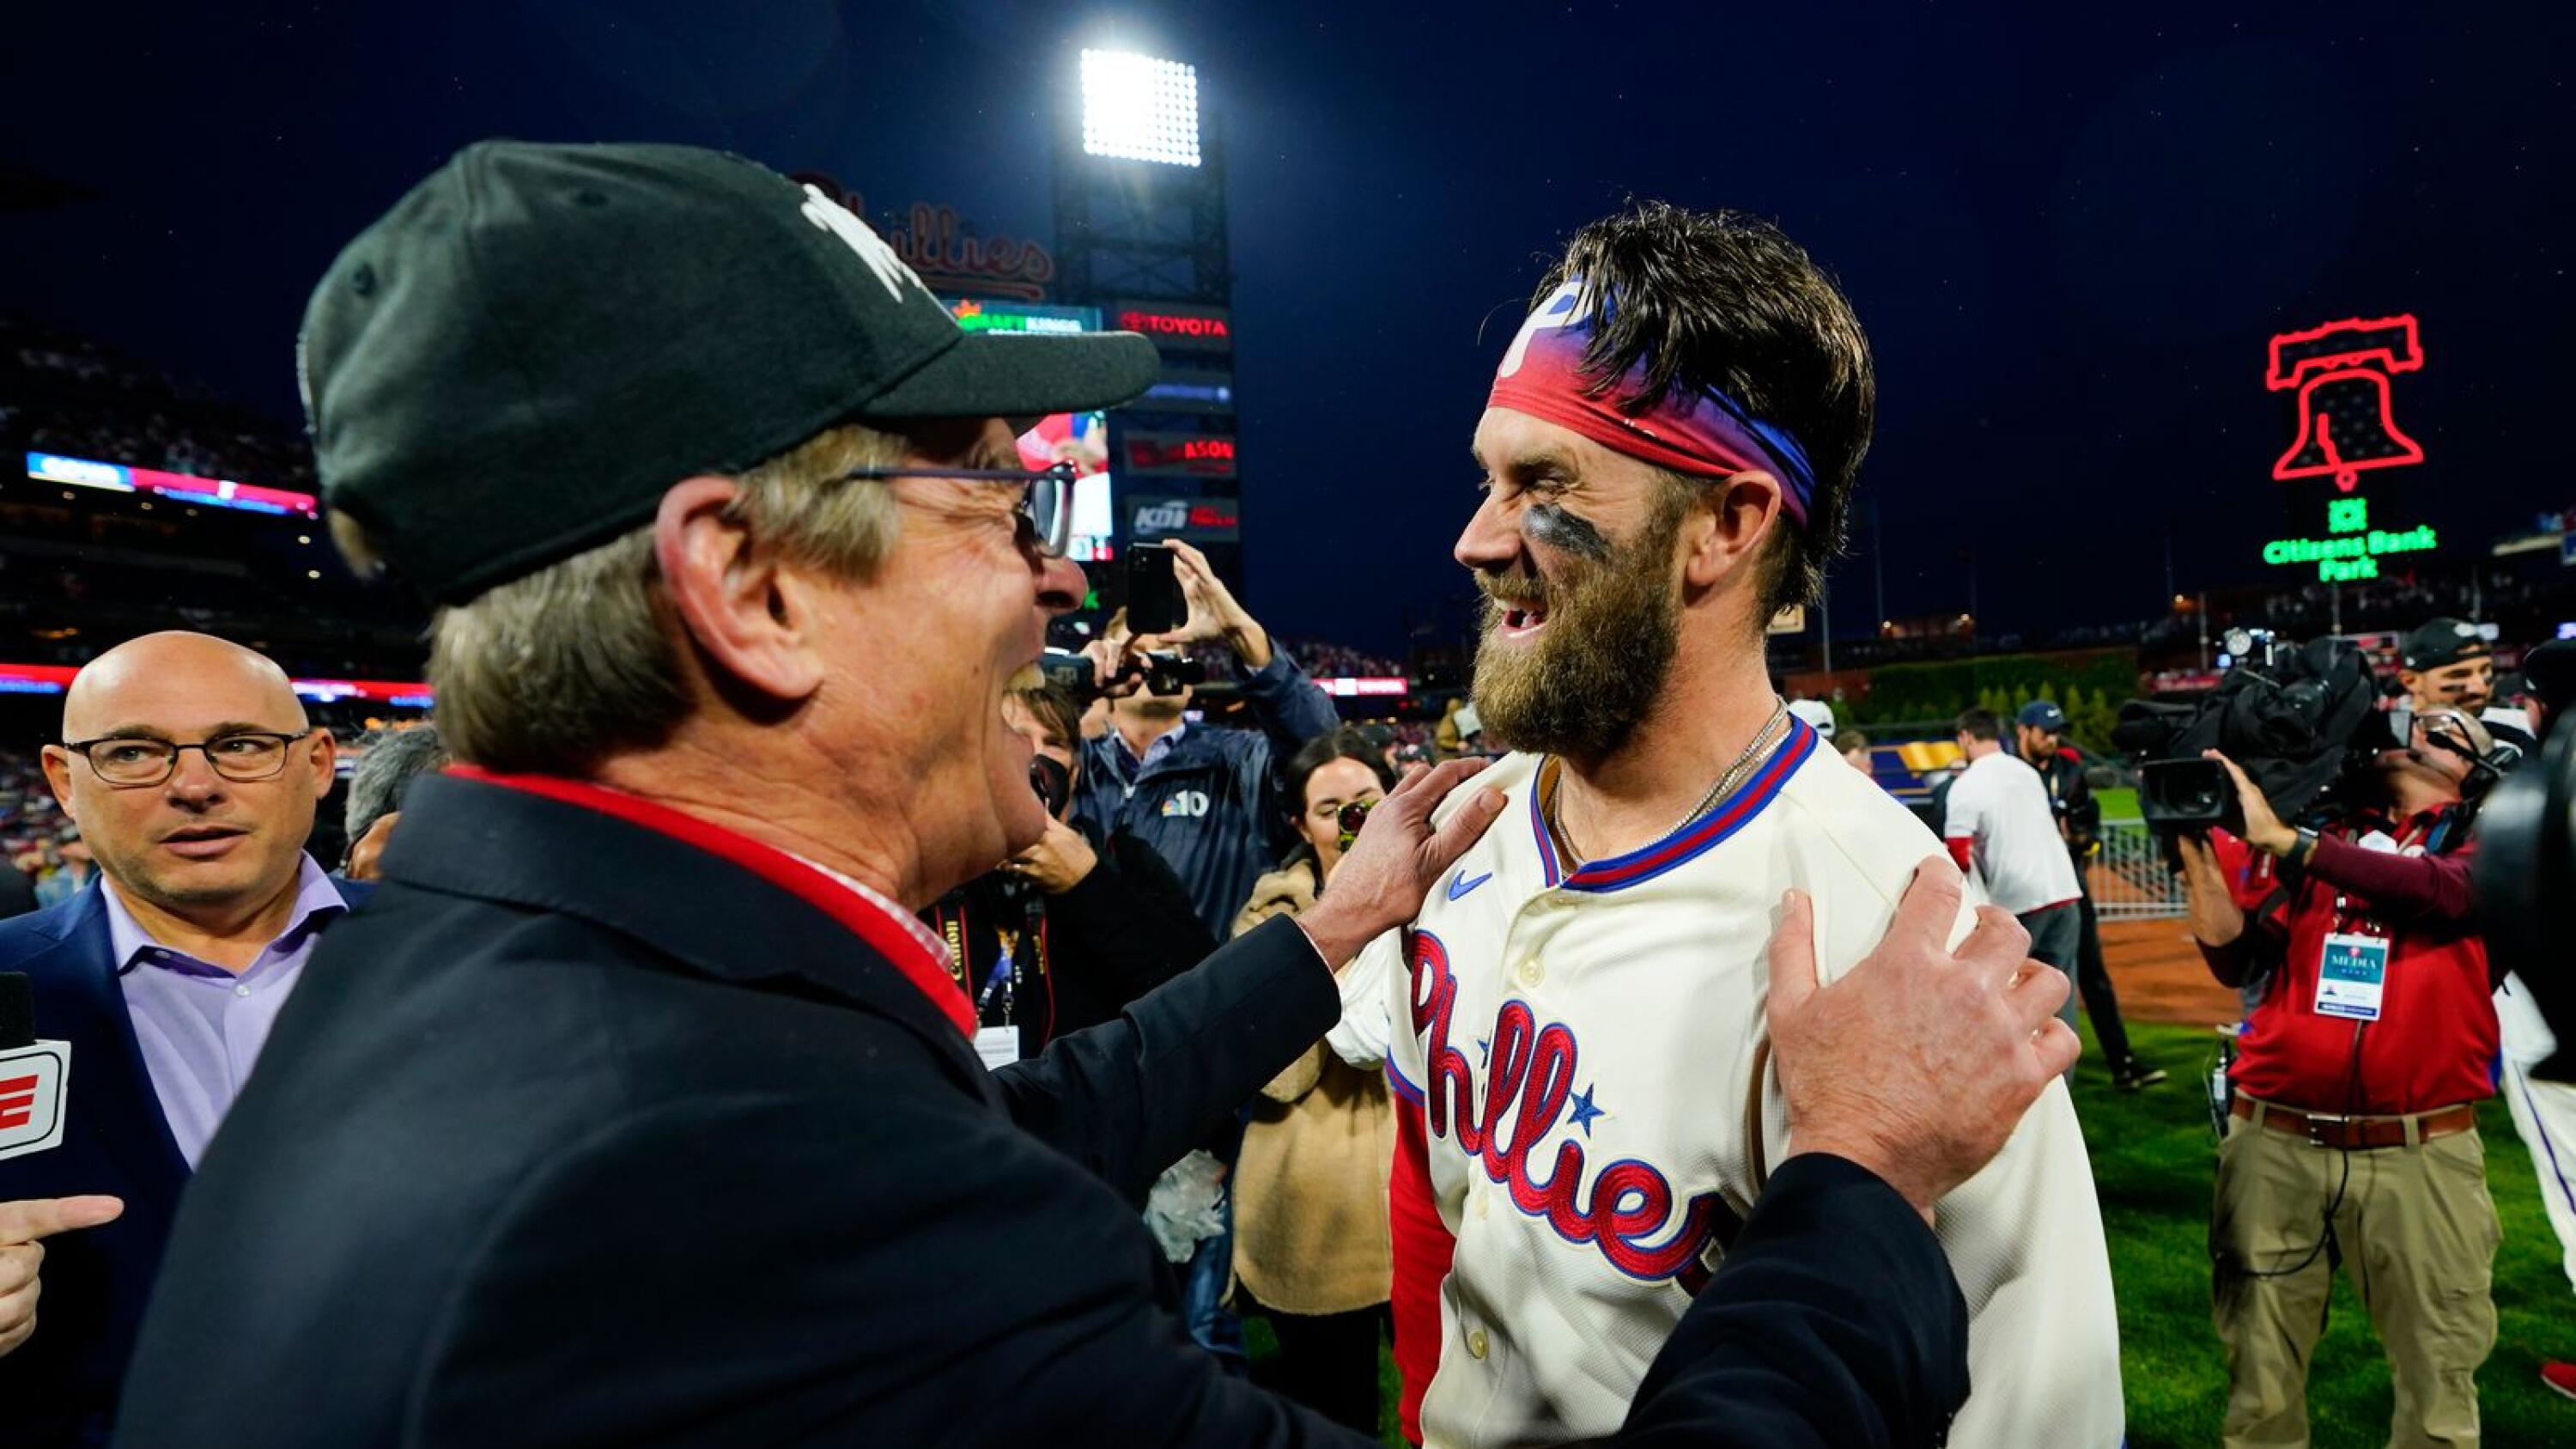 Bryce Harper, Phillies nearing World Series after win vs. Padres